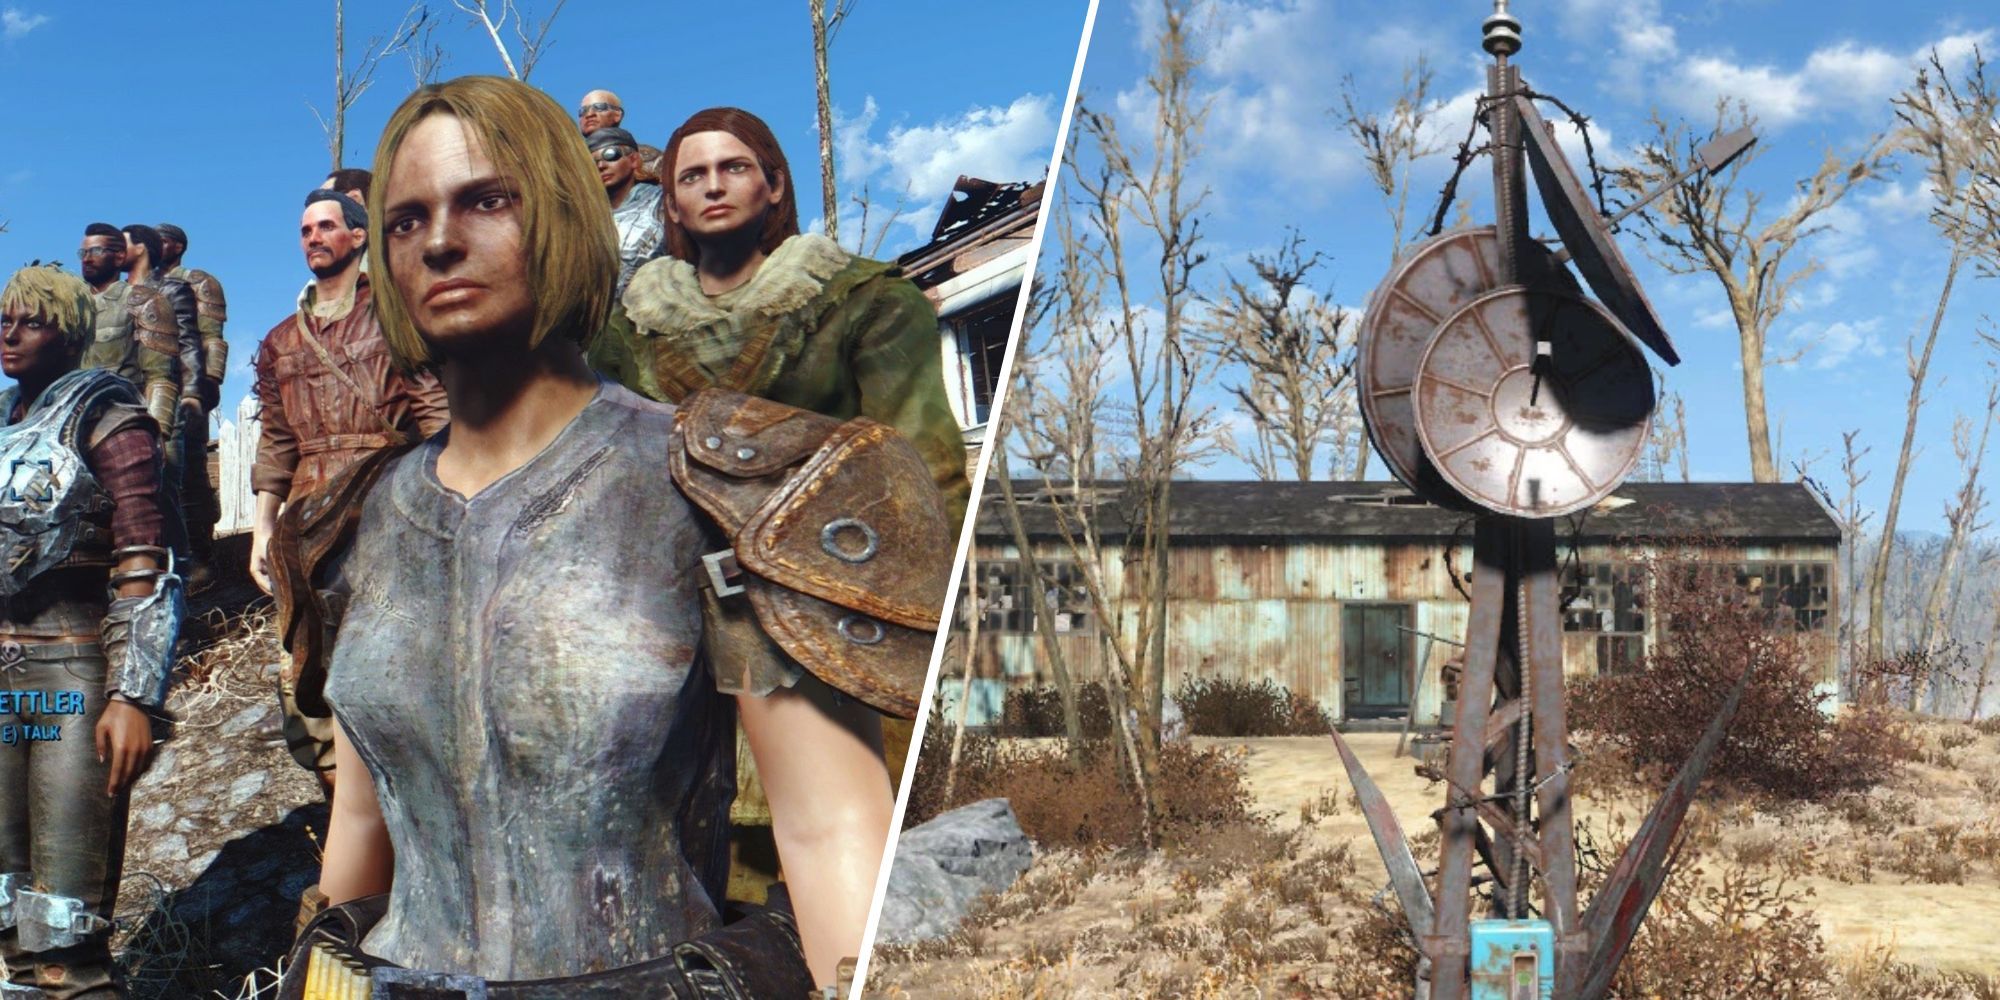 Split Image of settlers in fallout 4 and a recruitment beacon